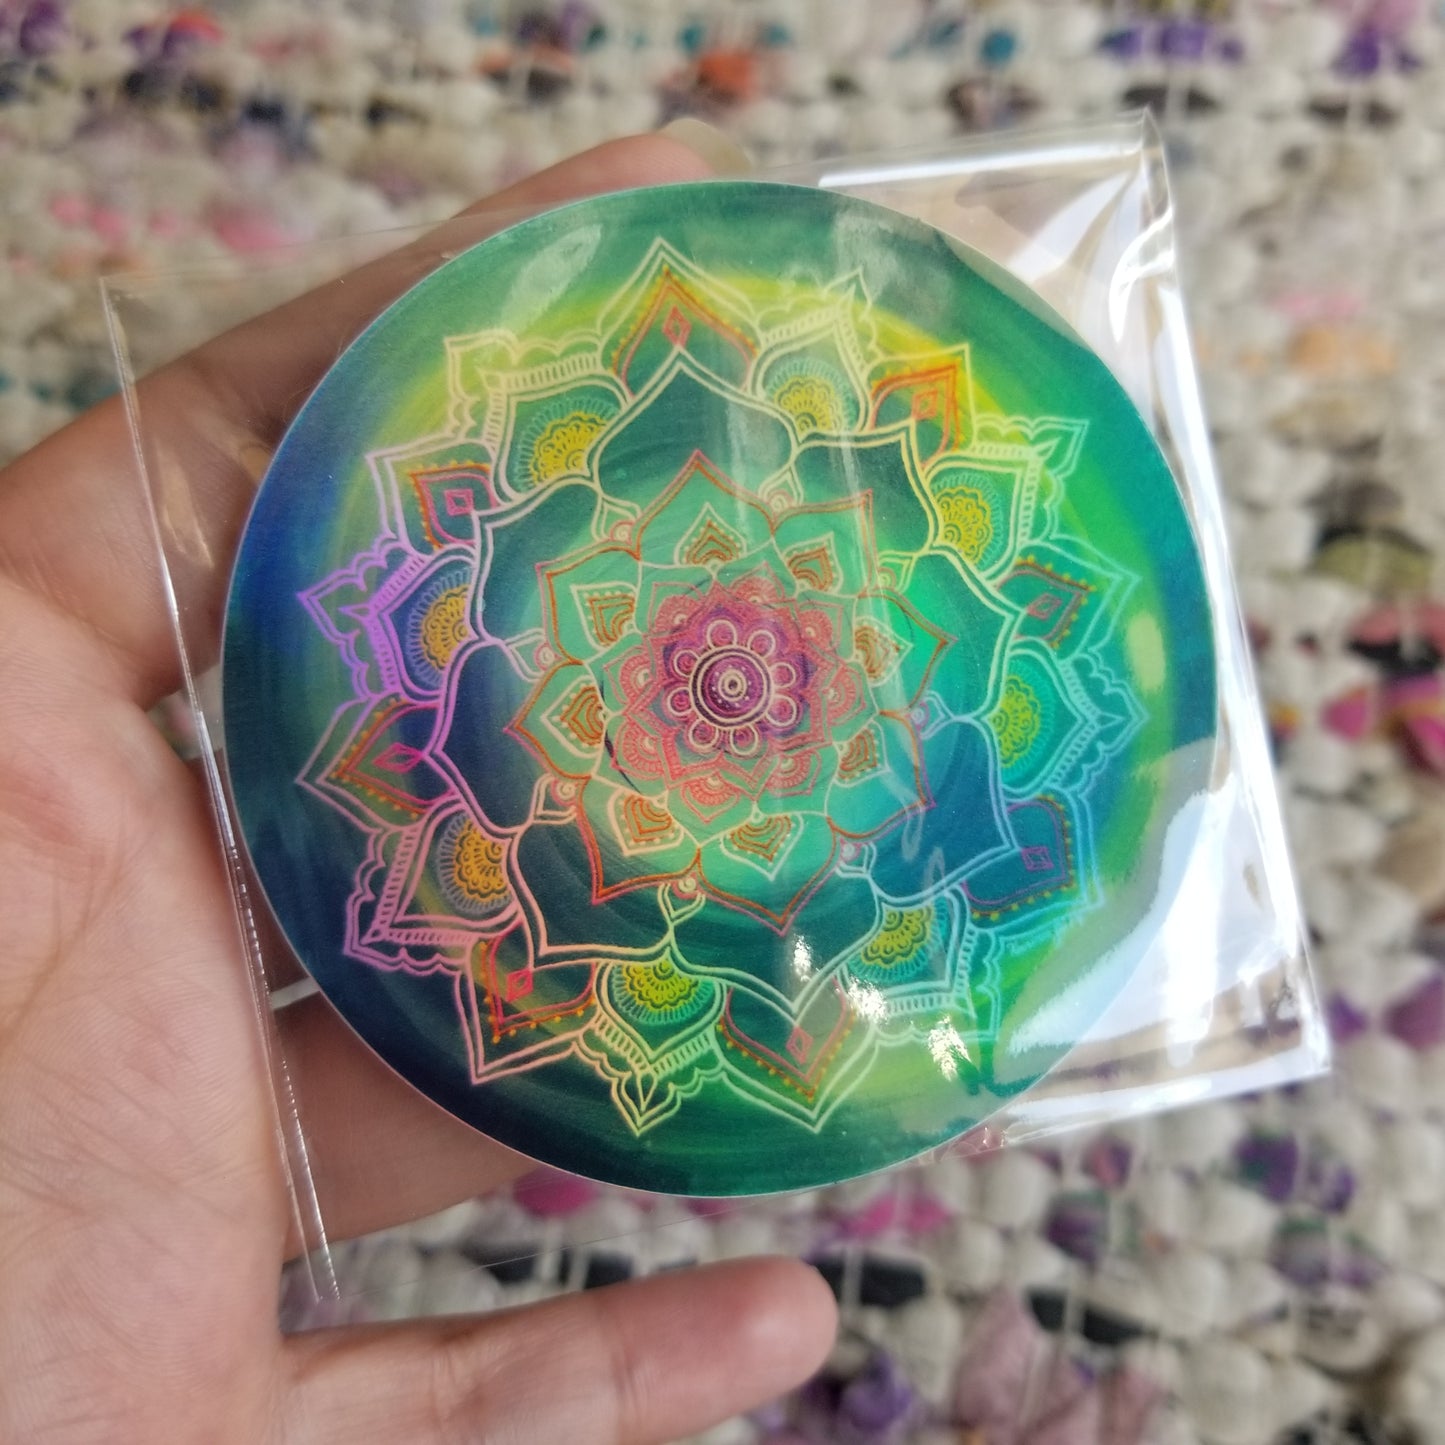 The Next Phase Holographic Waterproof Art Sticker